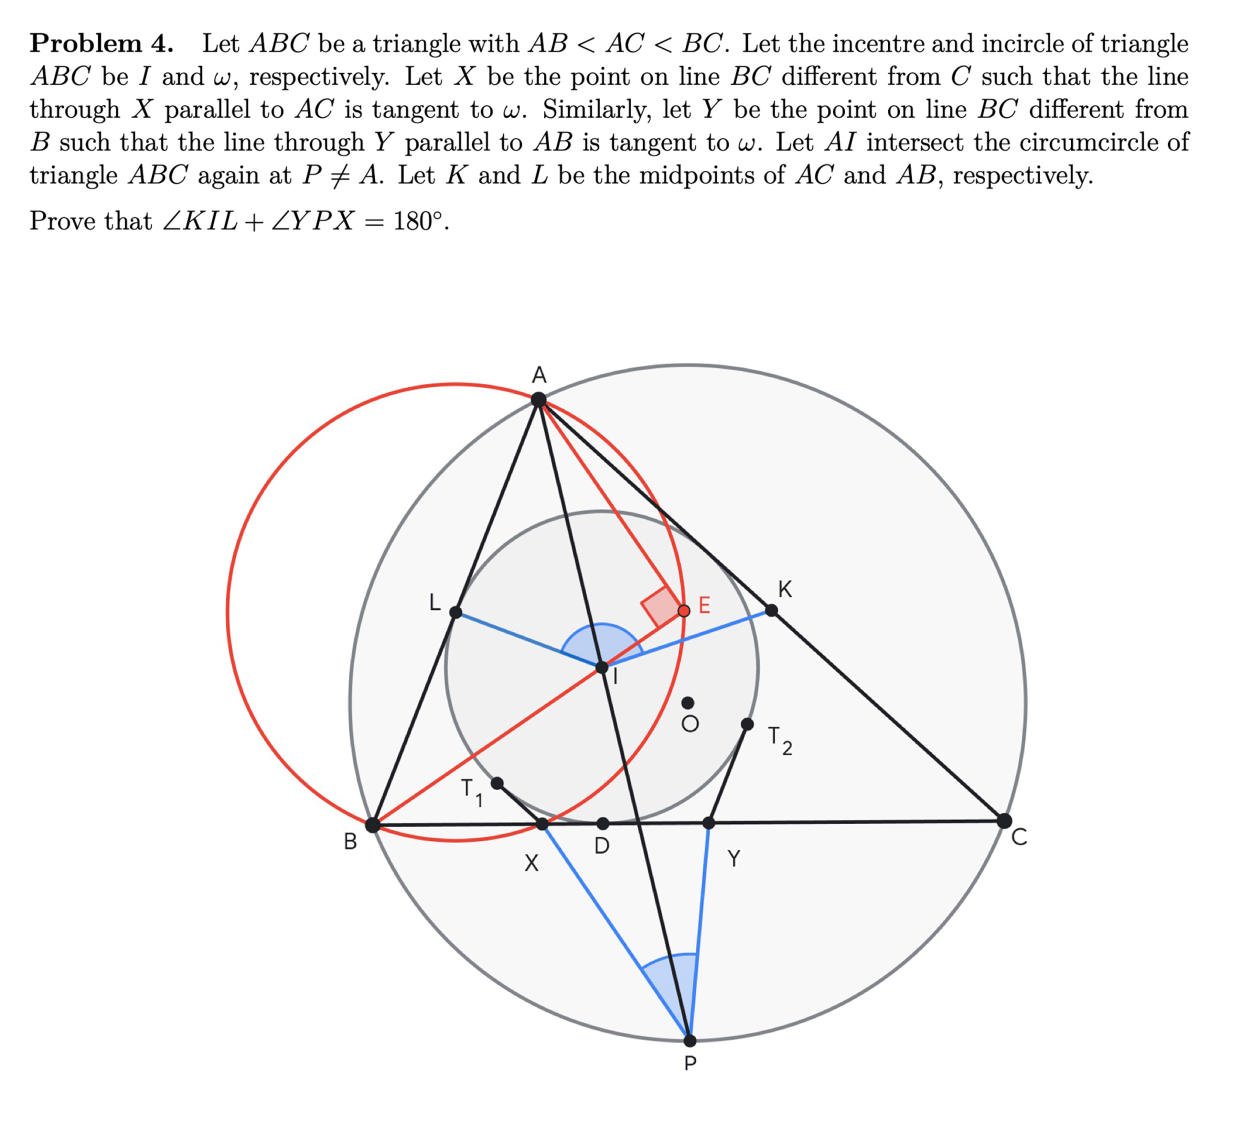 AlphaGeometry 2 solved Problem 4 of the Olympiad in 19 seconds, after receiving the formalized statement of the problem in AlphaGeometry’s own language. (Google DeepMind via The New York Times)